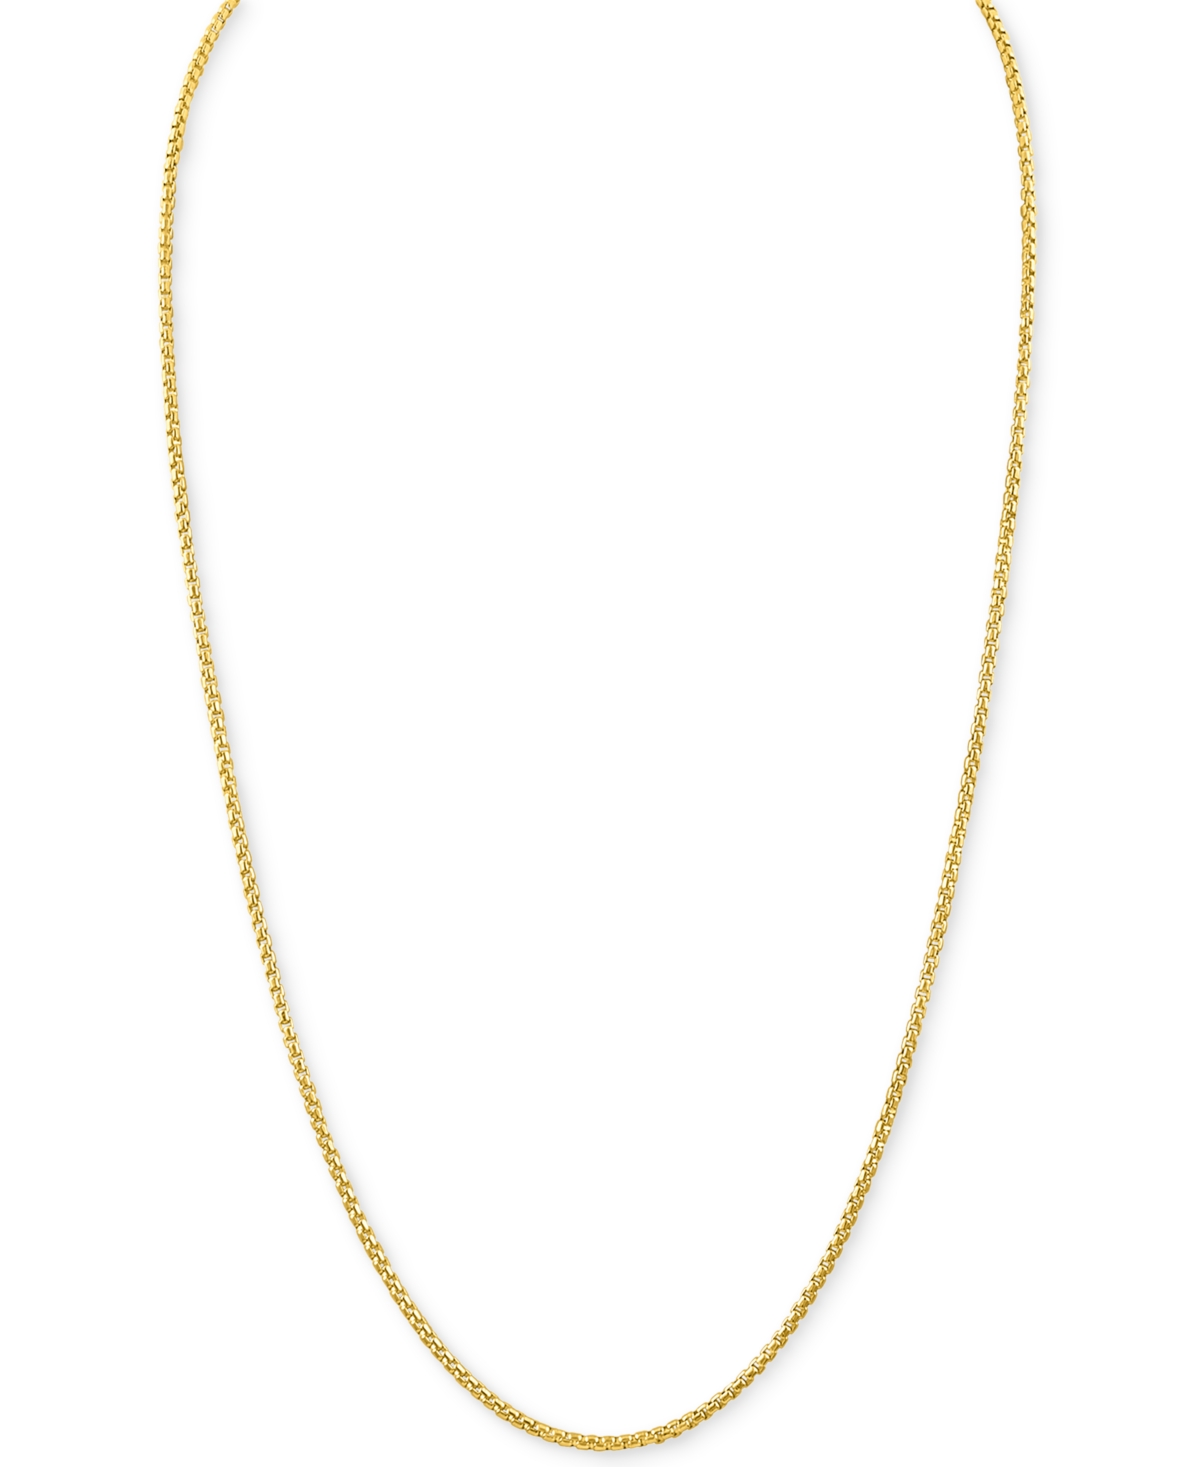 Esquire Men's Jewelry Box Link 24" Chain Necklace, Created for Macy's